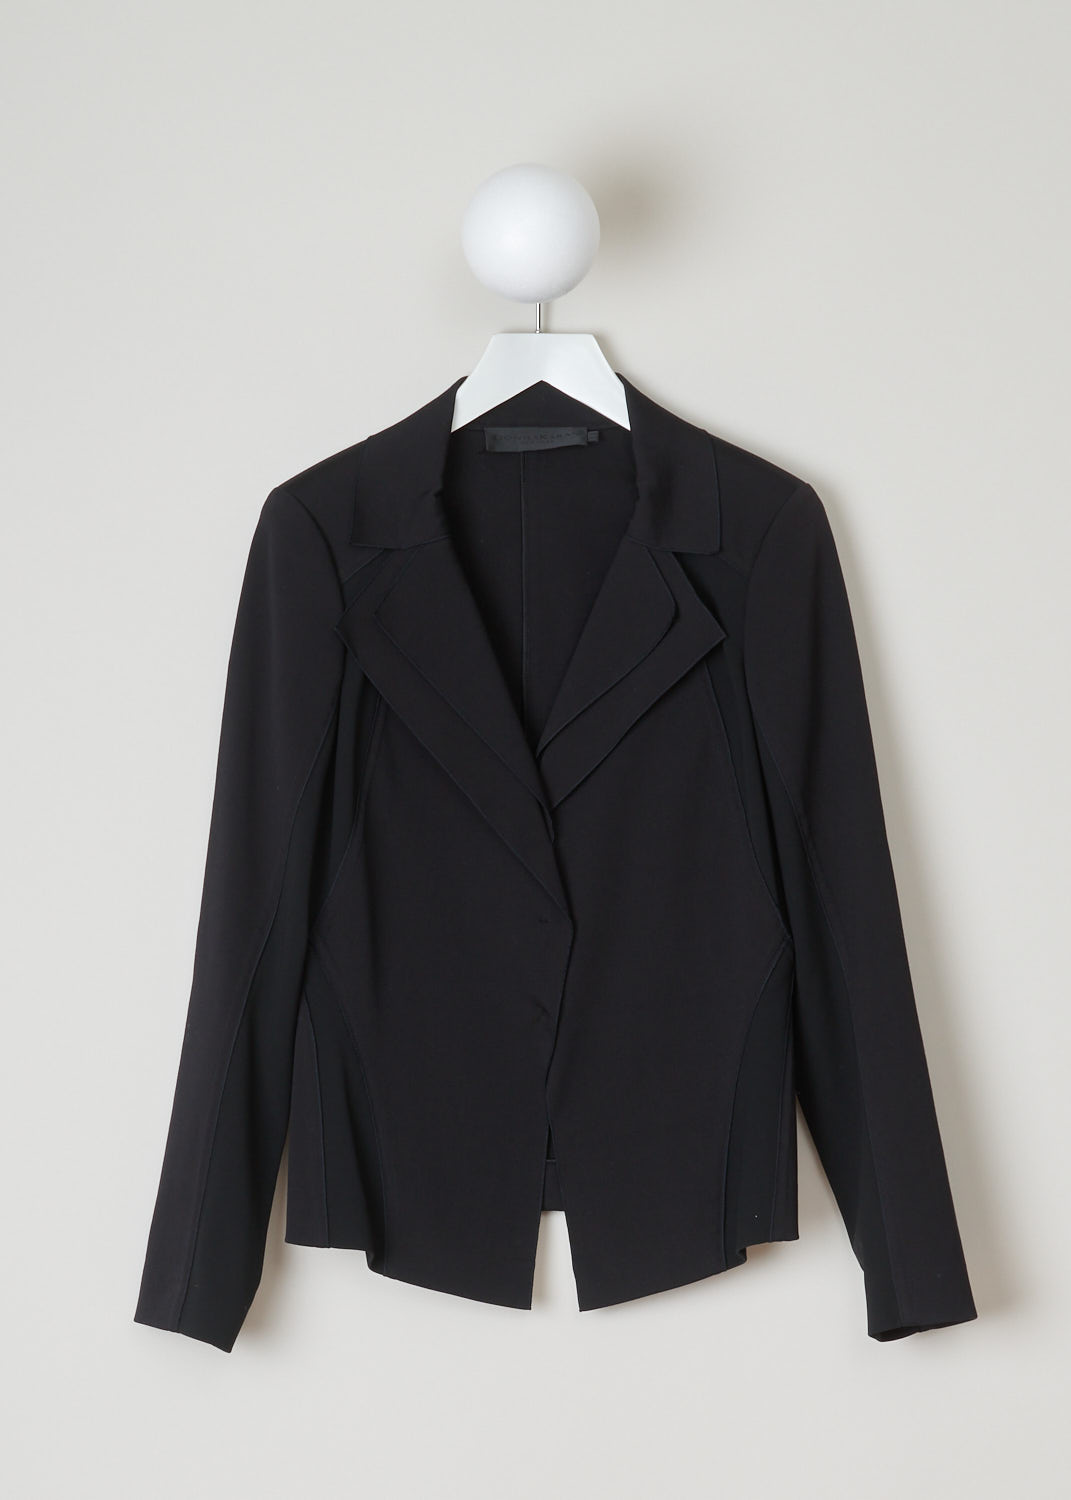 Donna Karan, black double lapel jacket, A42J238073_001_black, black, front, Black jacket comes with a pointed collar and double lapels. Featuring long sleeves and has backing buttons on the front as your closure option. This jacket is made up from two kinds of fabrics a stretchy kind and a regular kind, and placed in a certain way where the jacket stretches where needed. 